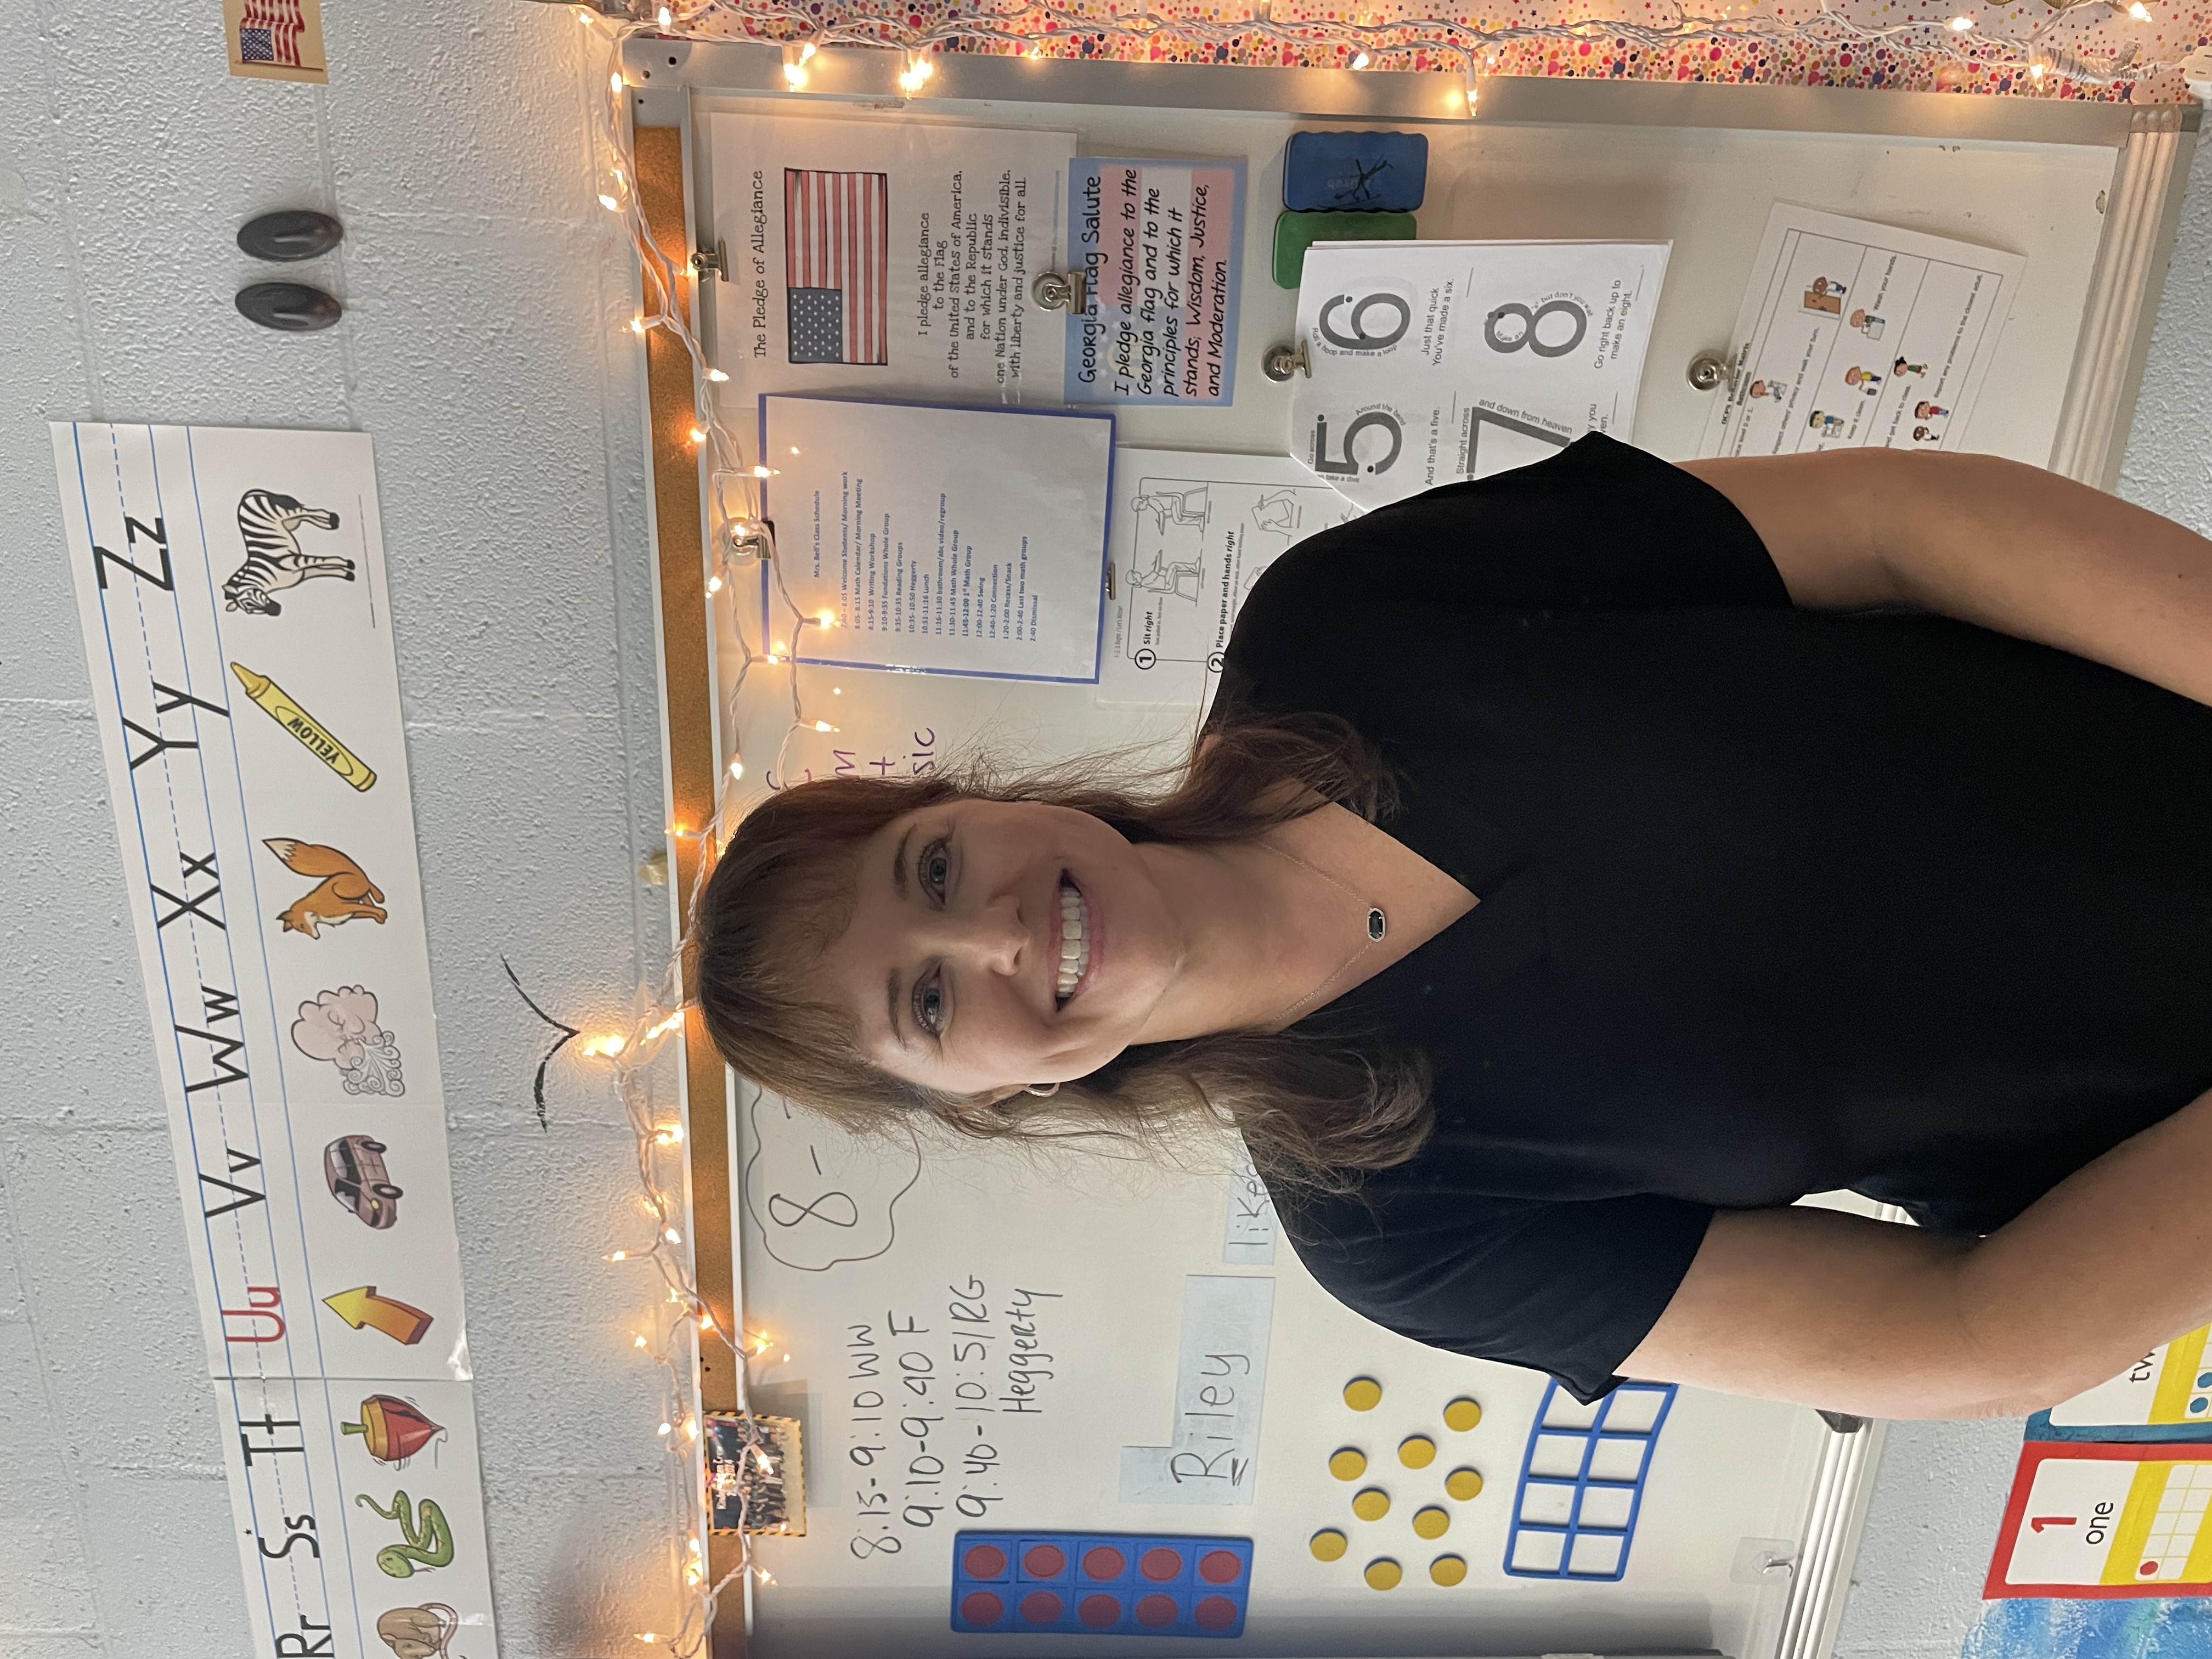 CALEB BALDWIN/THE OGLETHORPE ECHO Michele Bell, a kindergarten teacher at OCPS, has been in the Athens area since graduating from UGA and immediately fell in love with Oglethorpe County. She said the sense of community and kindness from residents are like no other.